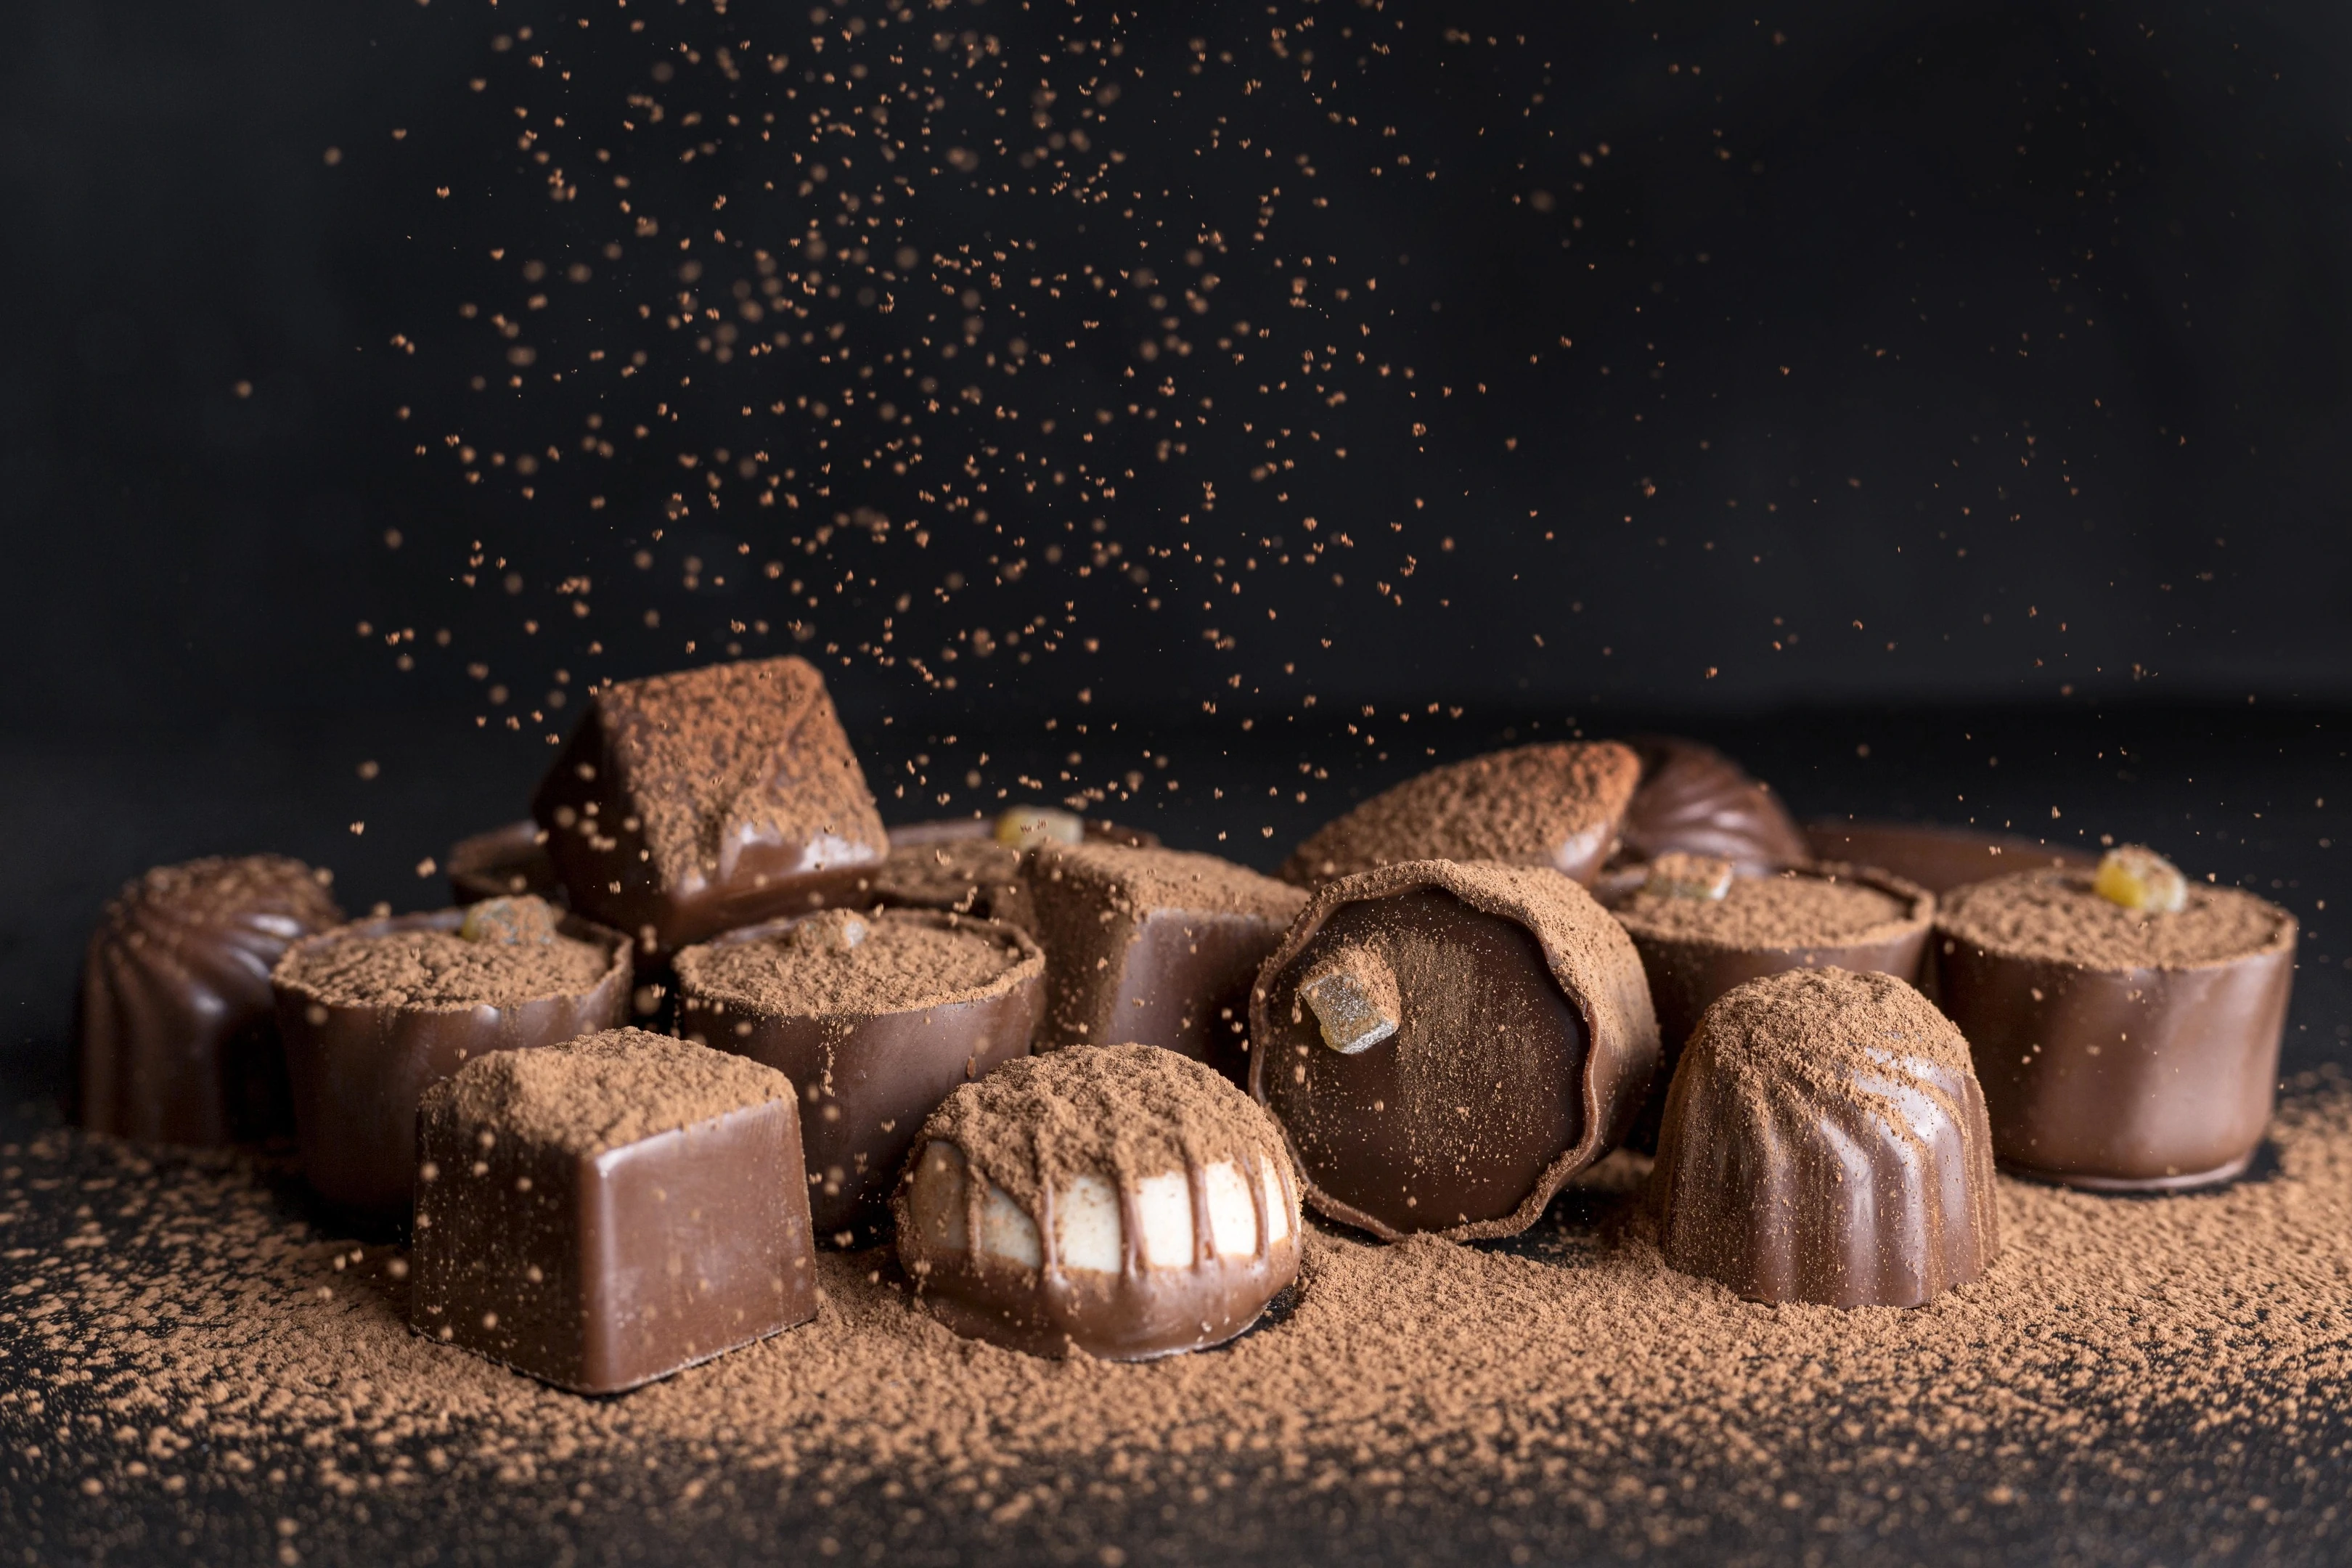 Variety of chocolate candies with cocoa powder